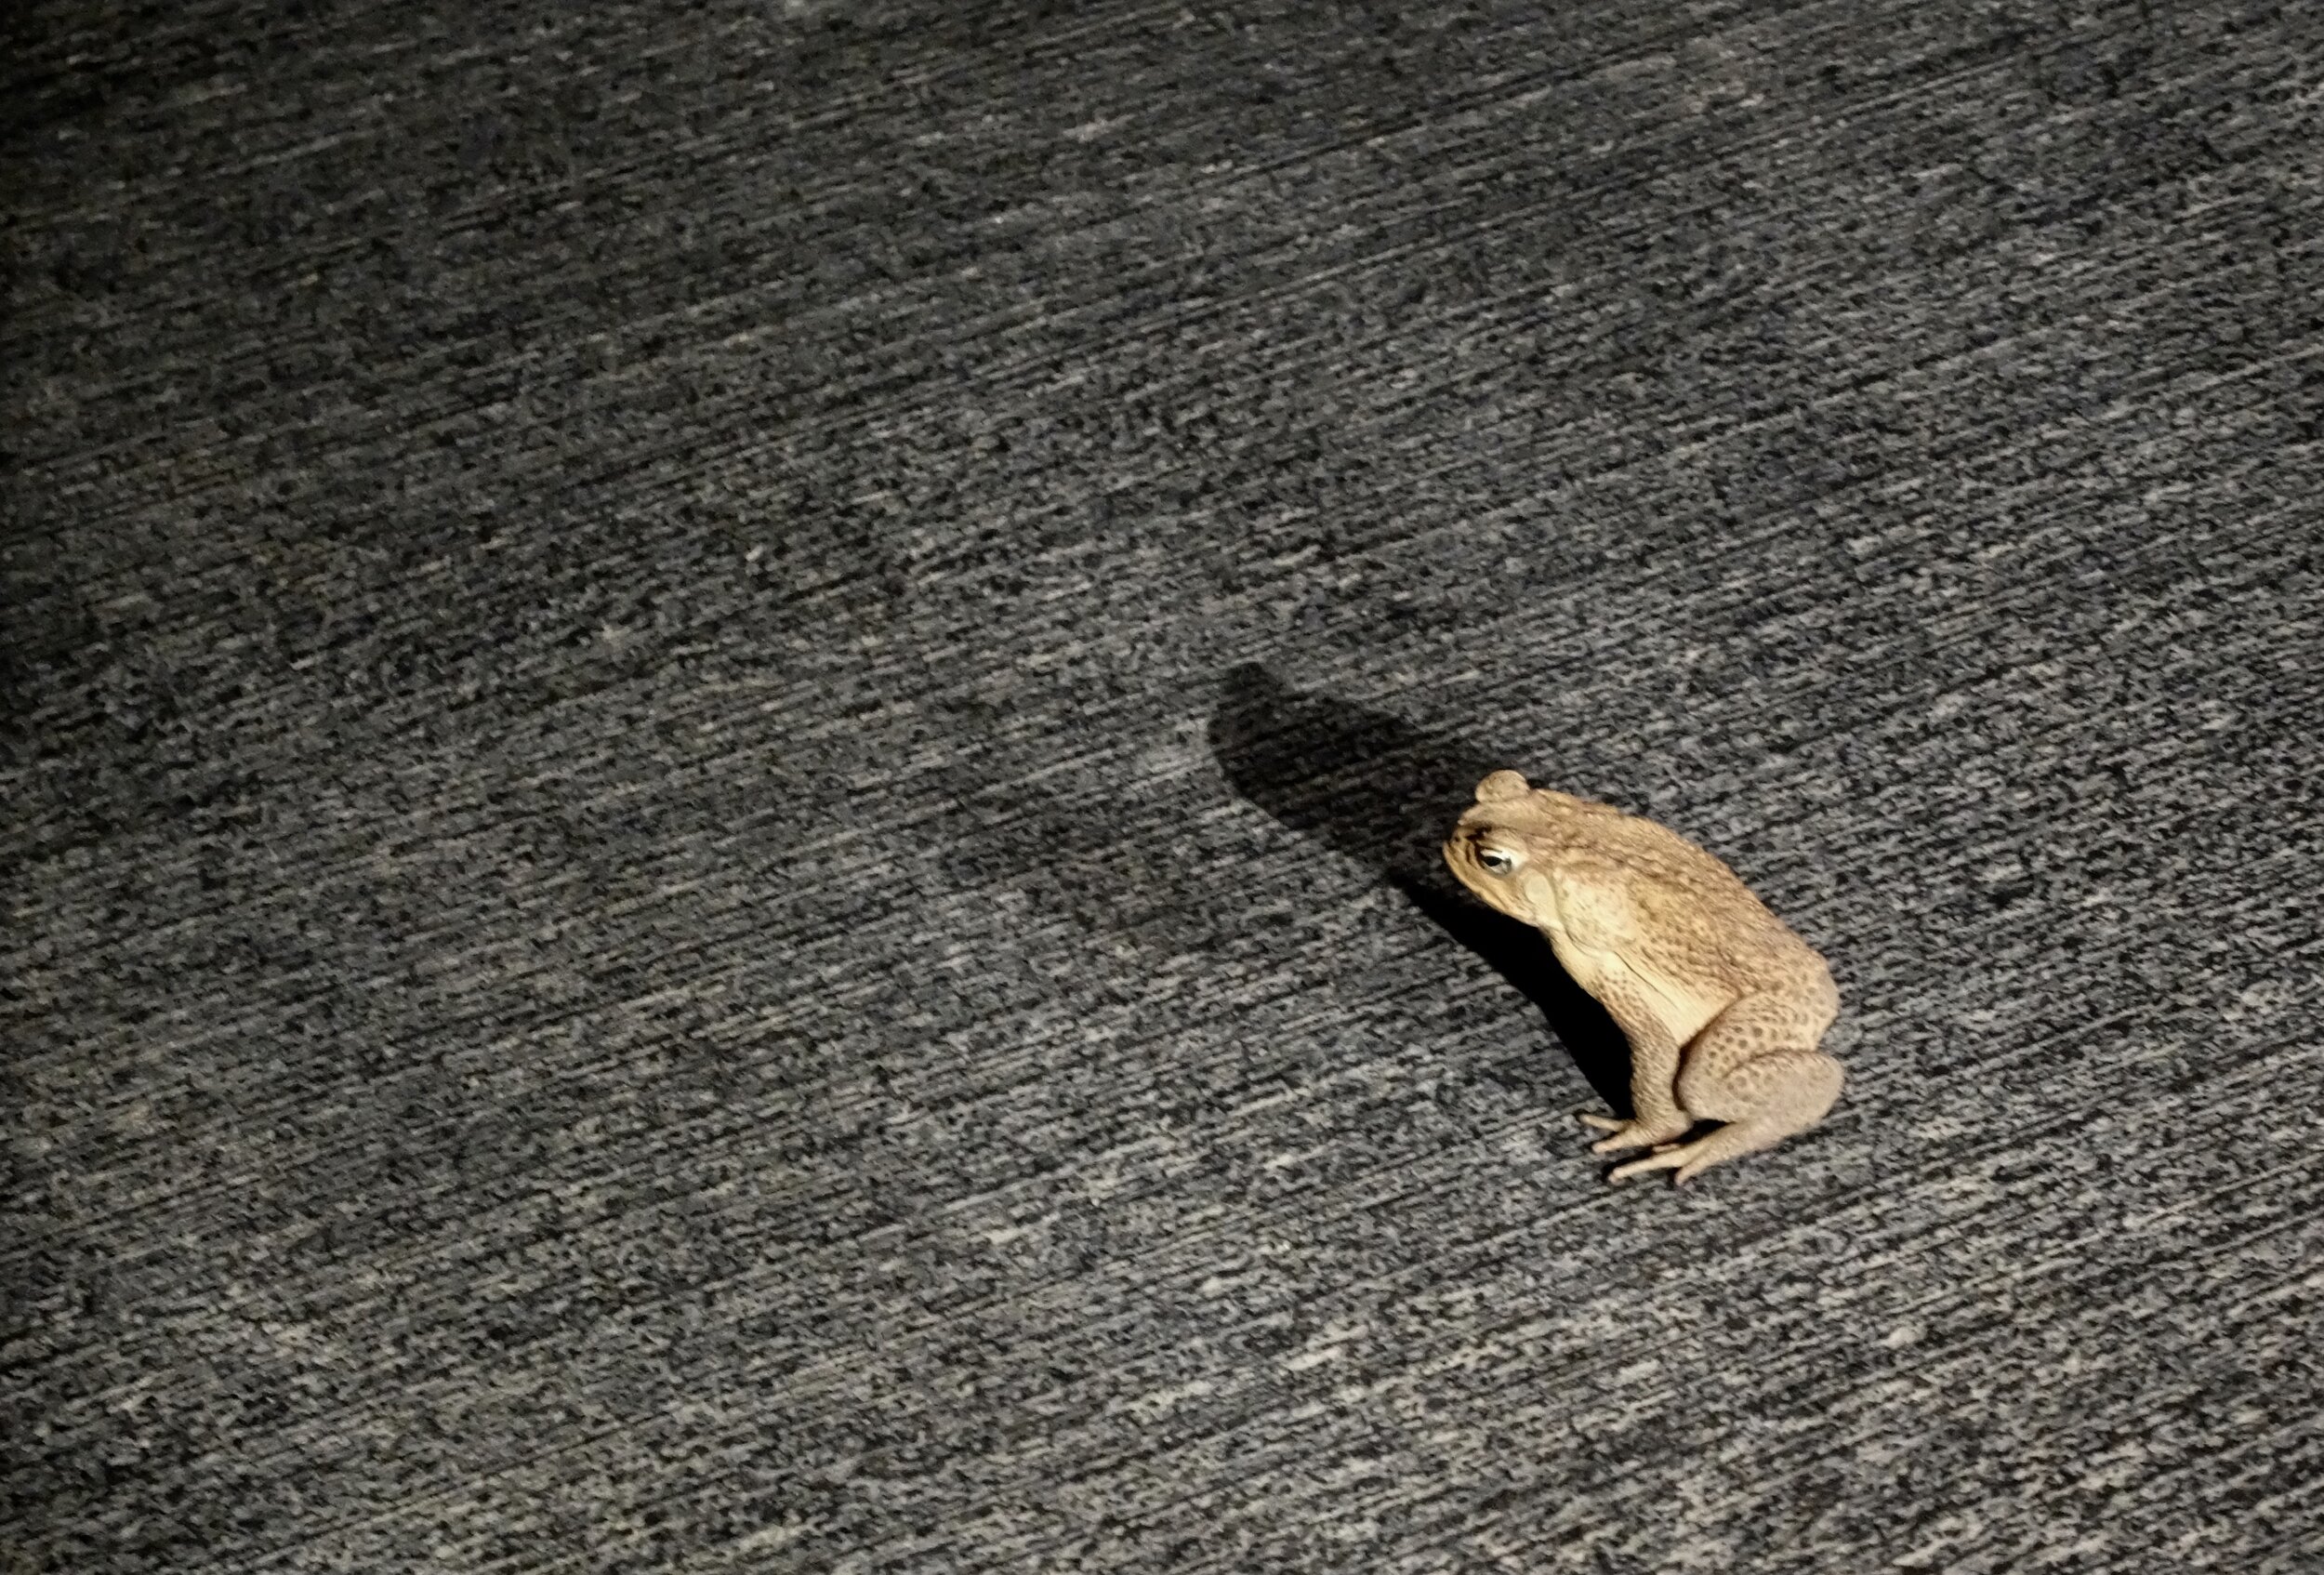 This froggie just sits there.  Lots of them found in the morning, flattened on the road.